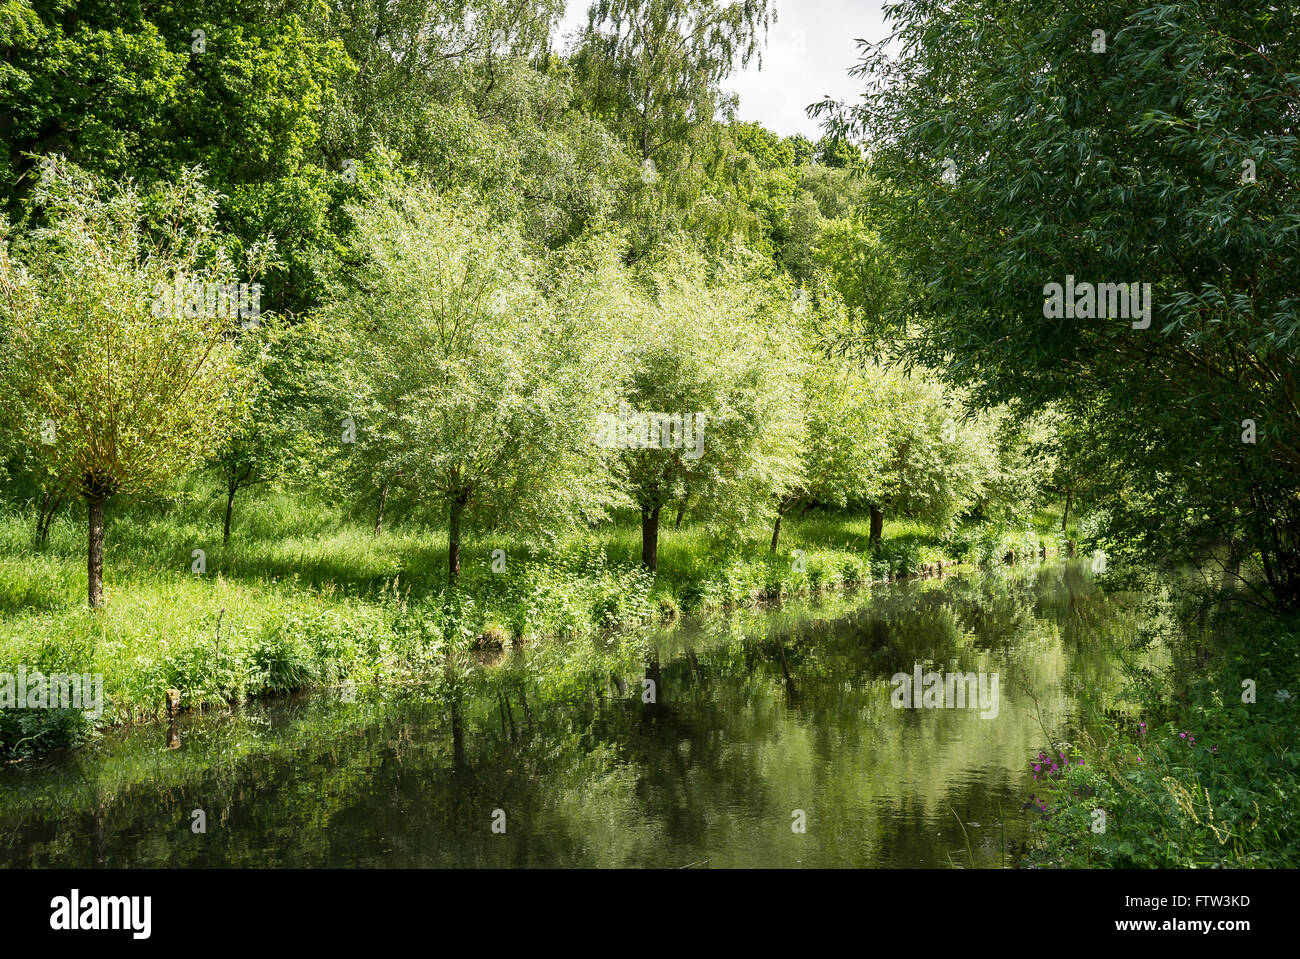 The tranquil River Wylye flows through Job's Mill garden in Wiltshire UK Stock Photo